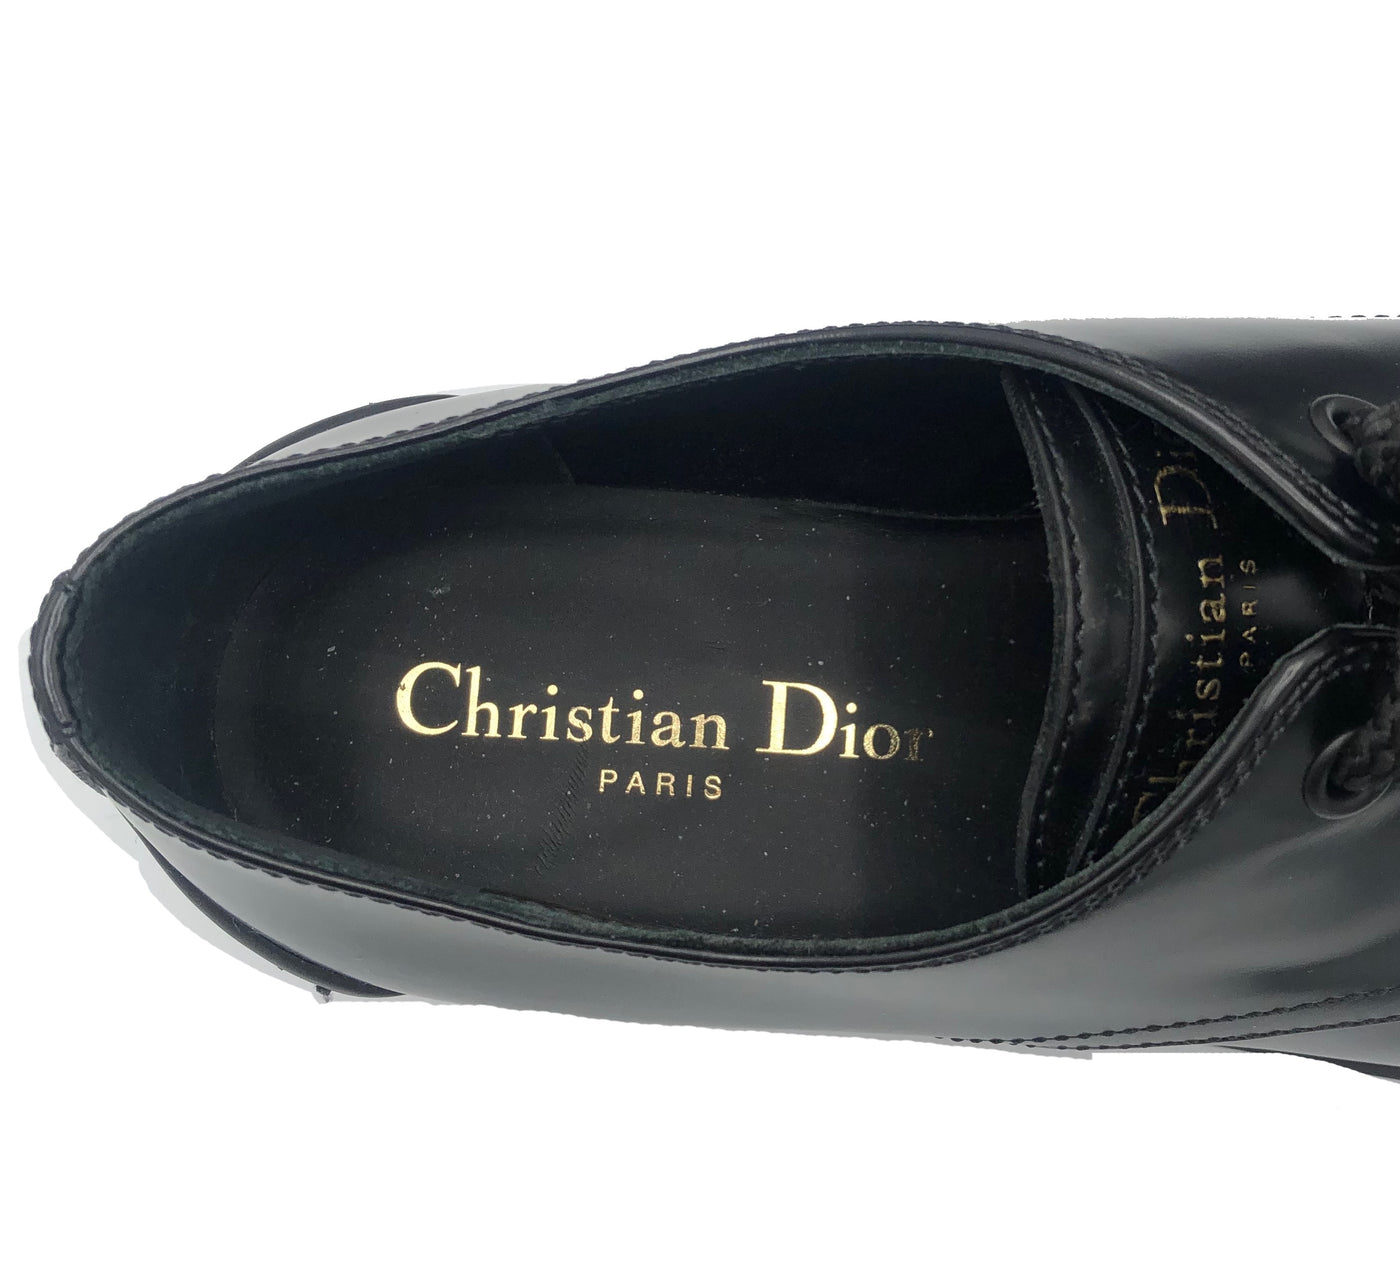 CHRISTIAN DIOR rubber shoes size 36 Never Worn with dust bags